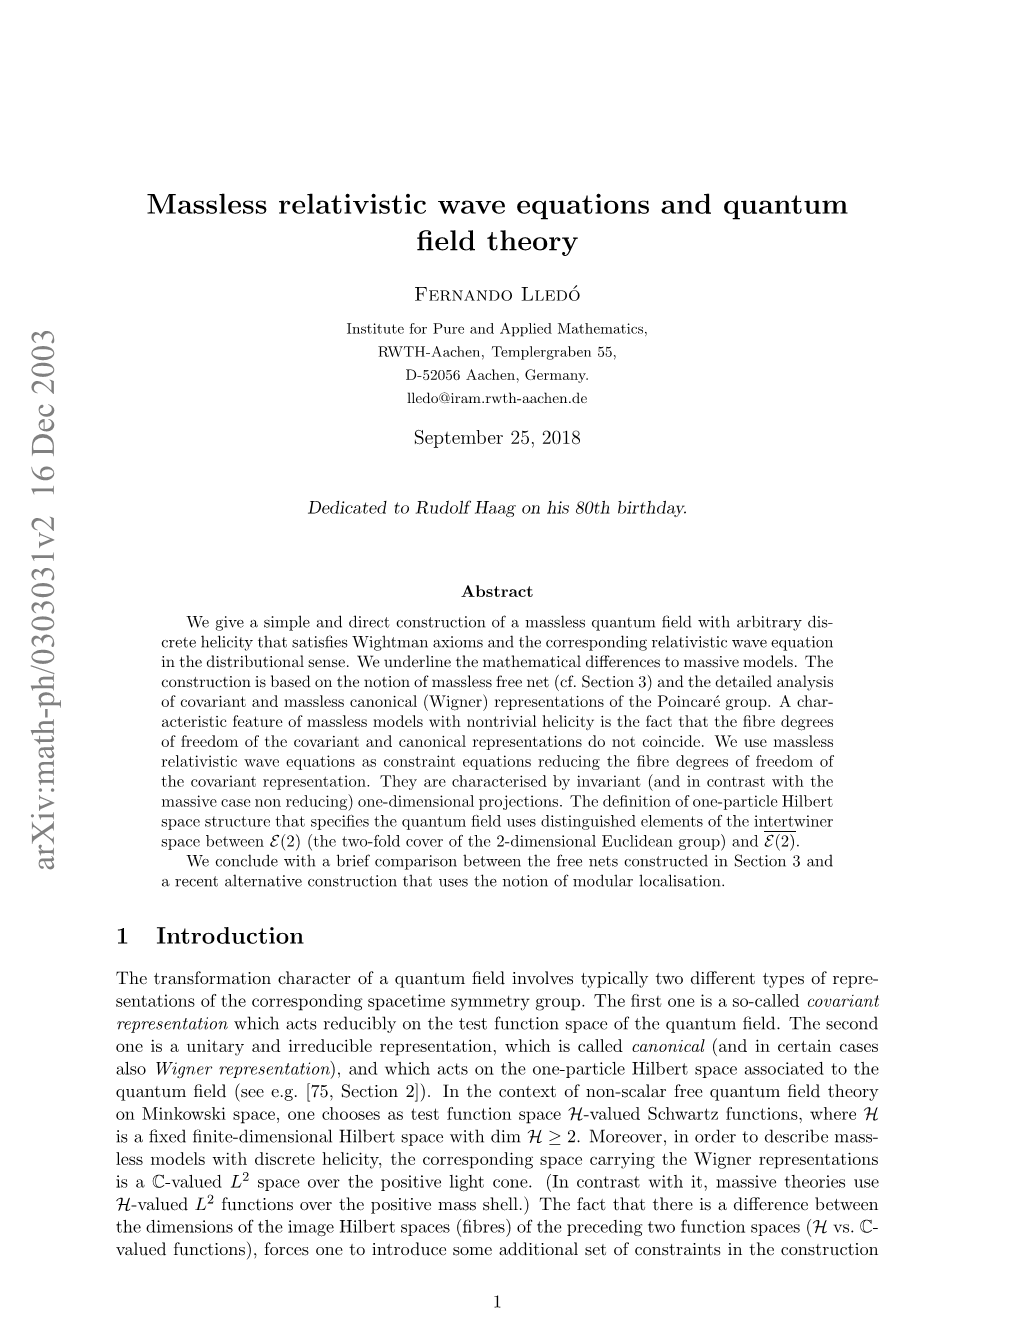 Massless Relativistic Wave Equations and Quantum Field Theory